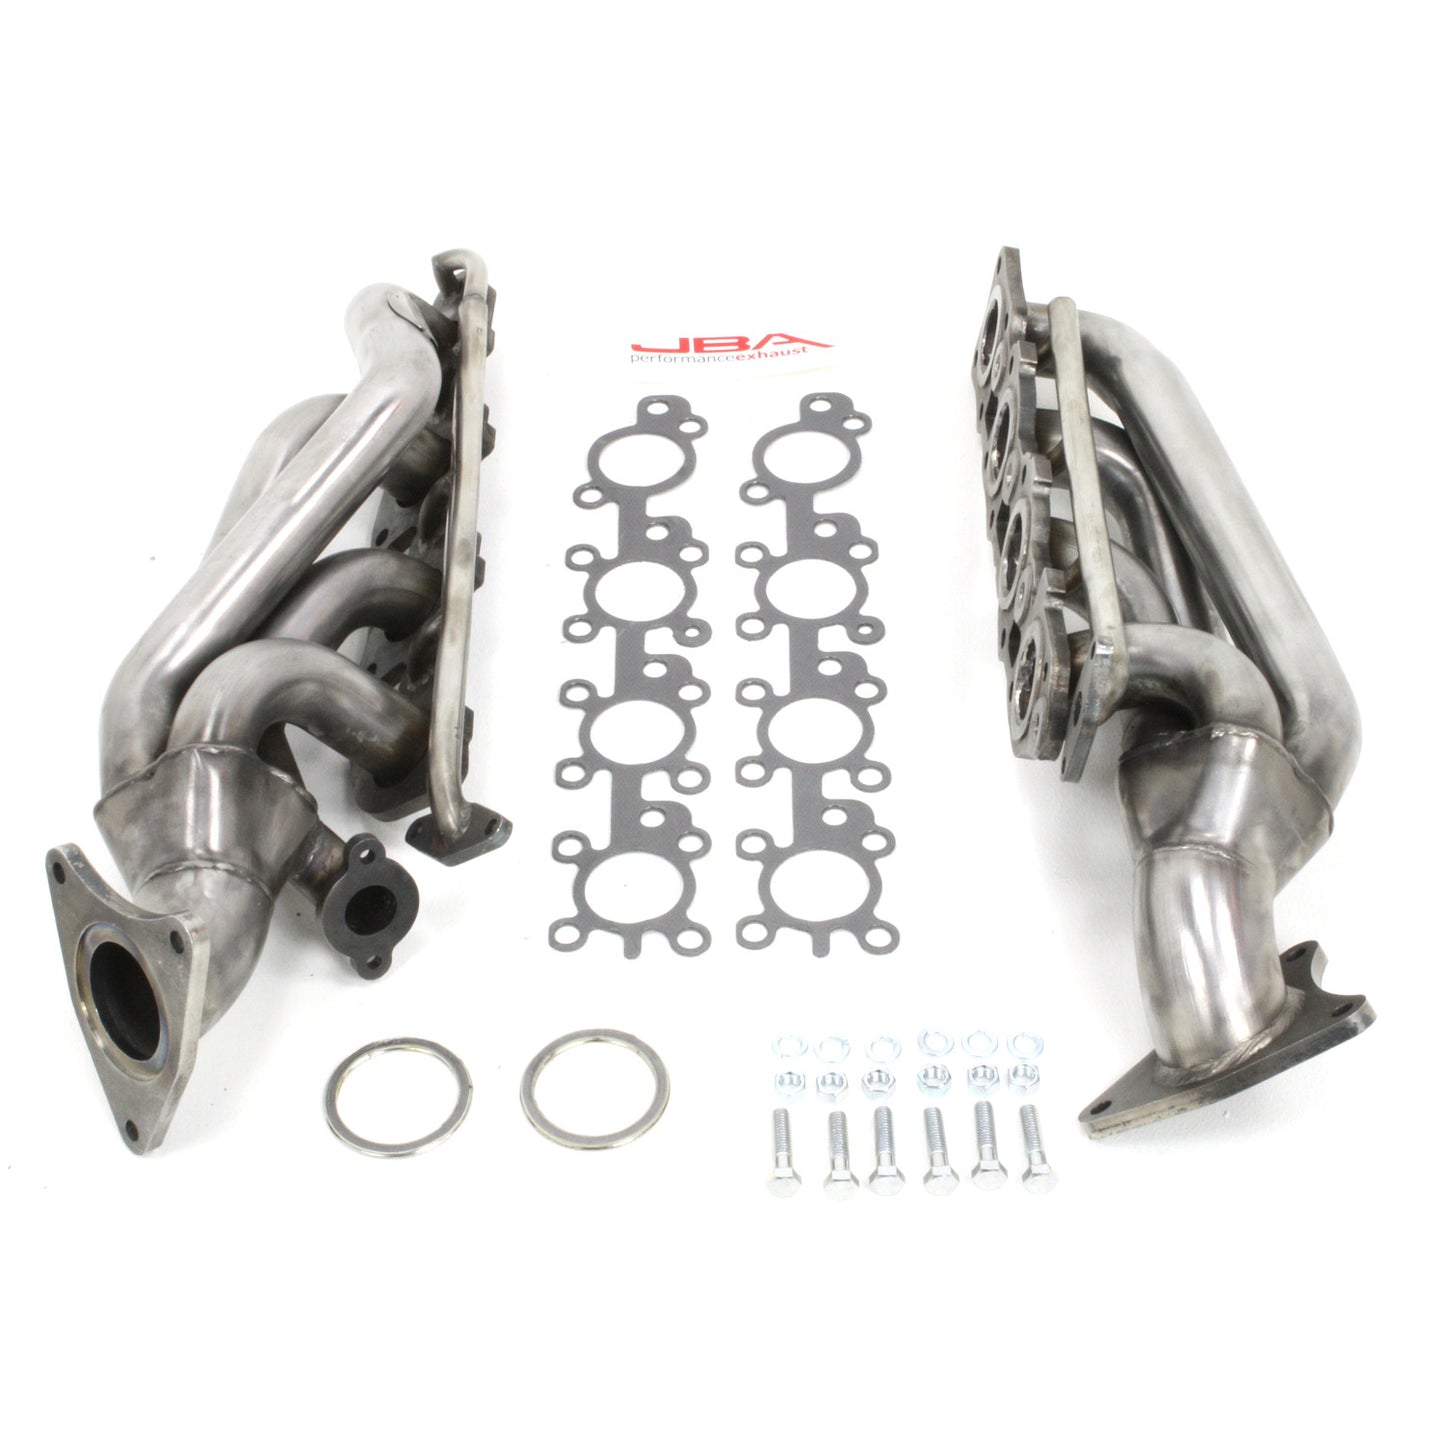 JBA Performance Exhaust 2014S Header Shorty Stainless Steel 10-18 Toyota Tundra 4.6L